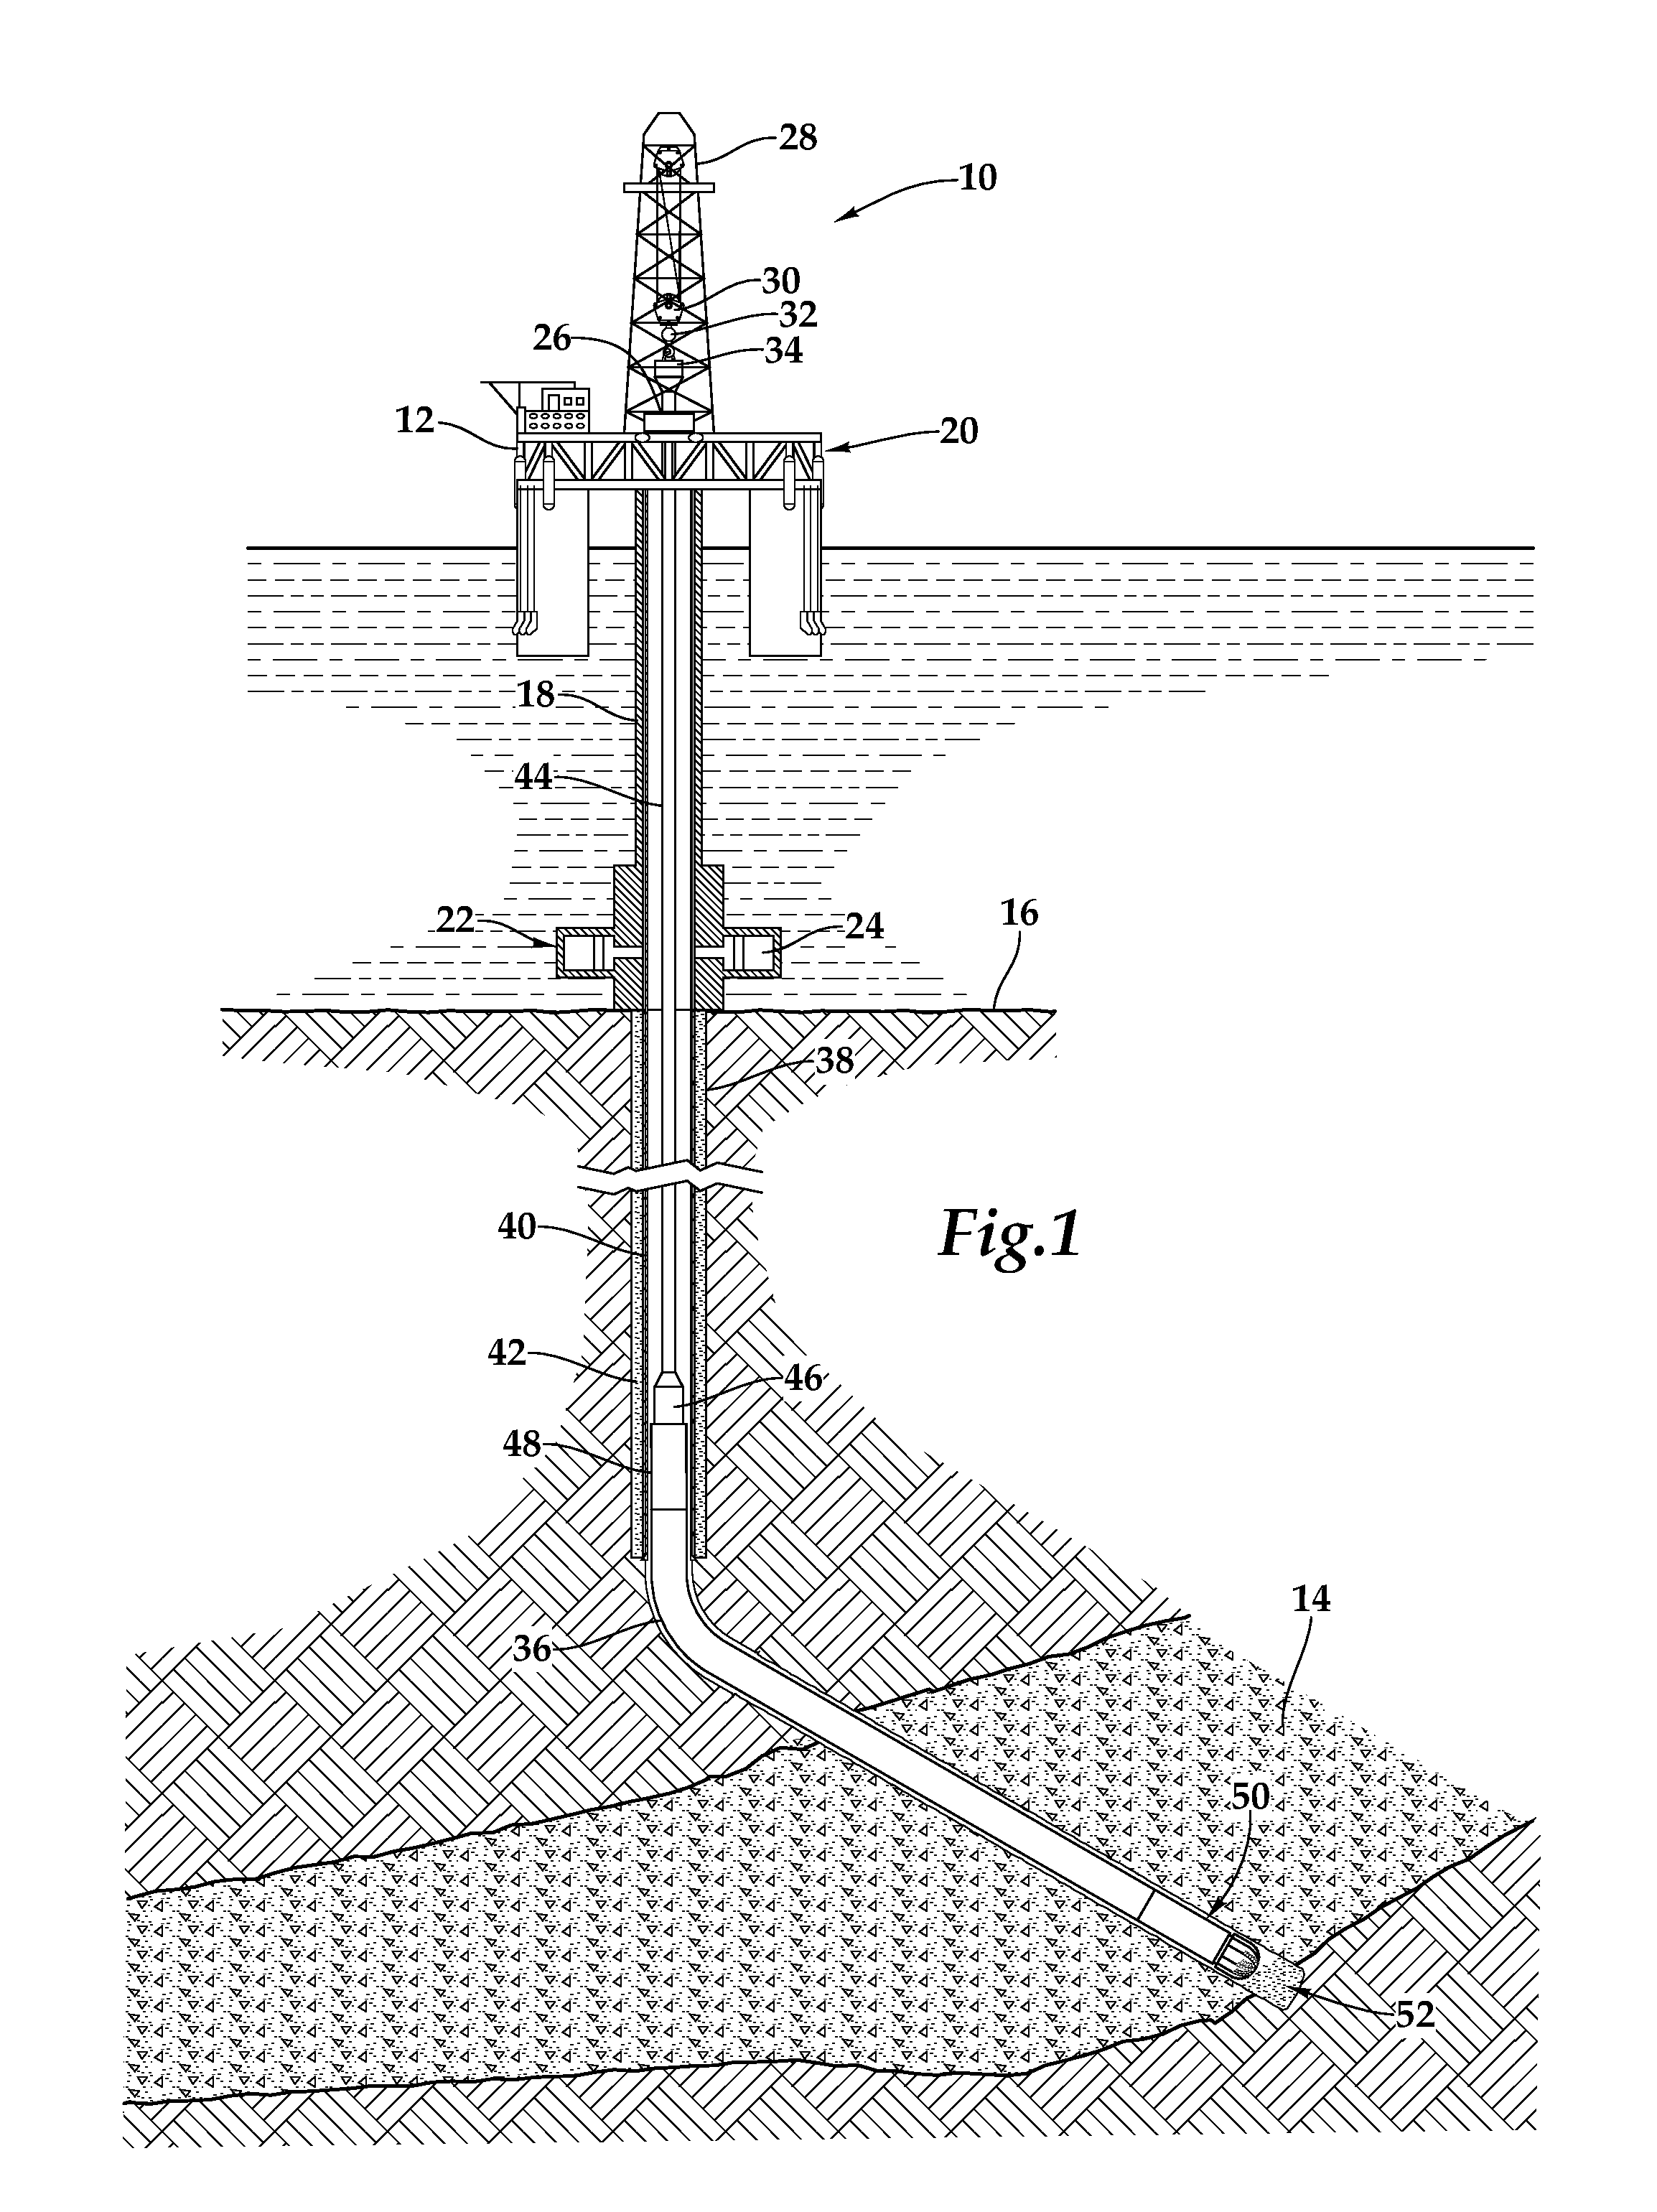 Apparatus and Method for Reaming a Wellbore During the Installation of a Tubular String